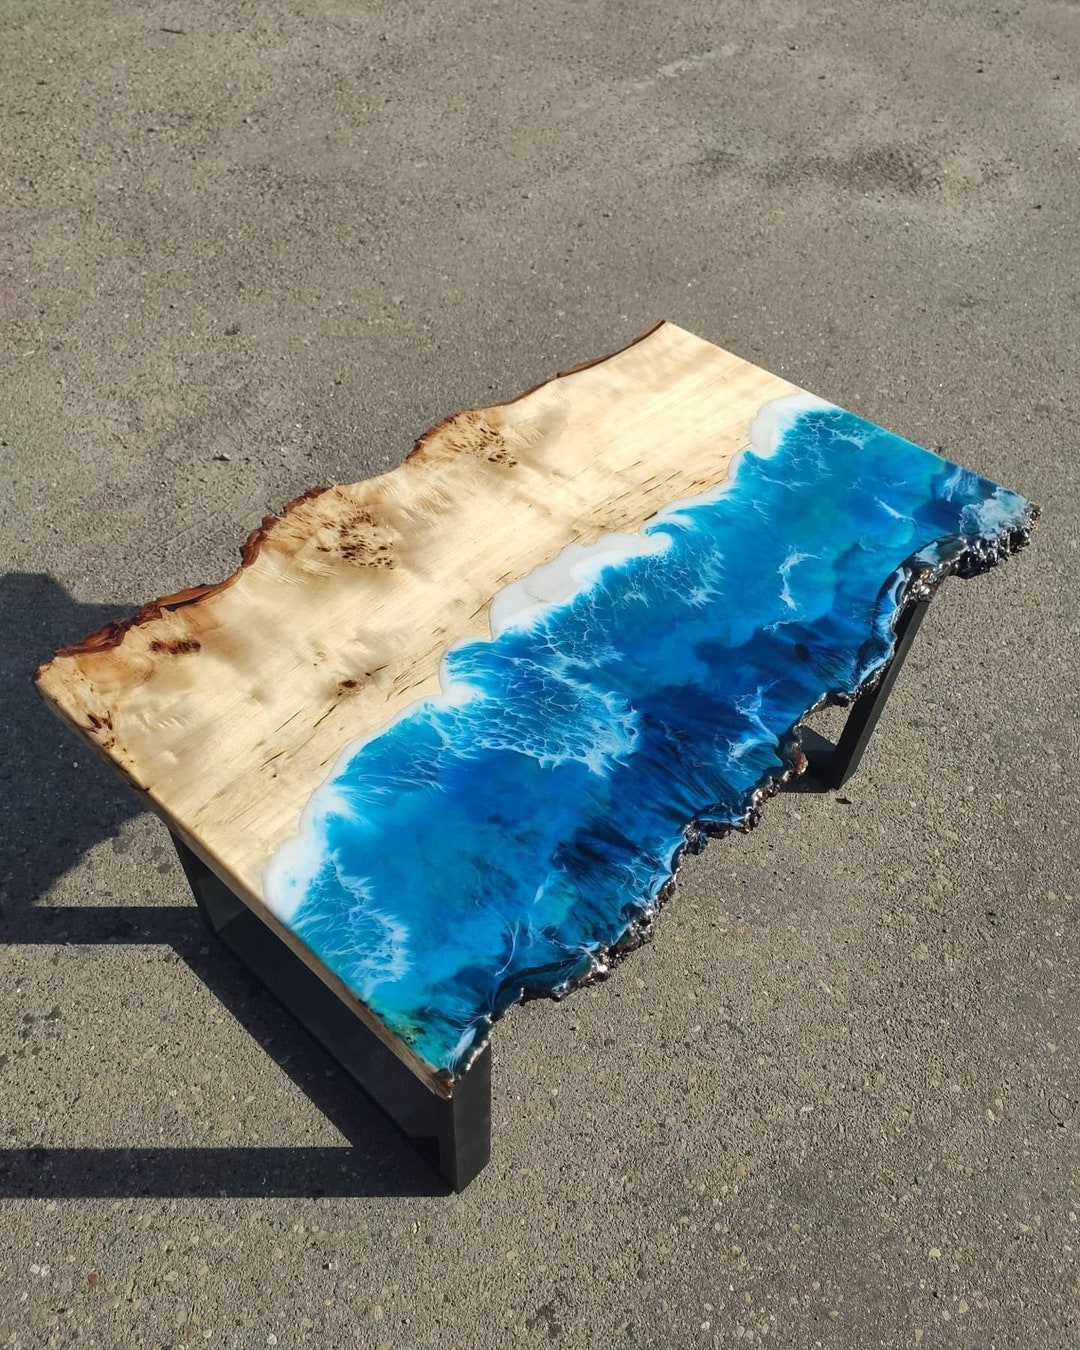 Buy epoxy resin 2 Online in Albania at Low Prices at desertcart